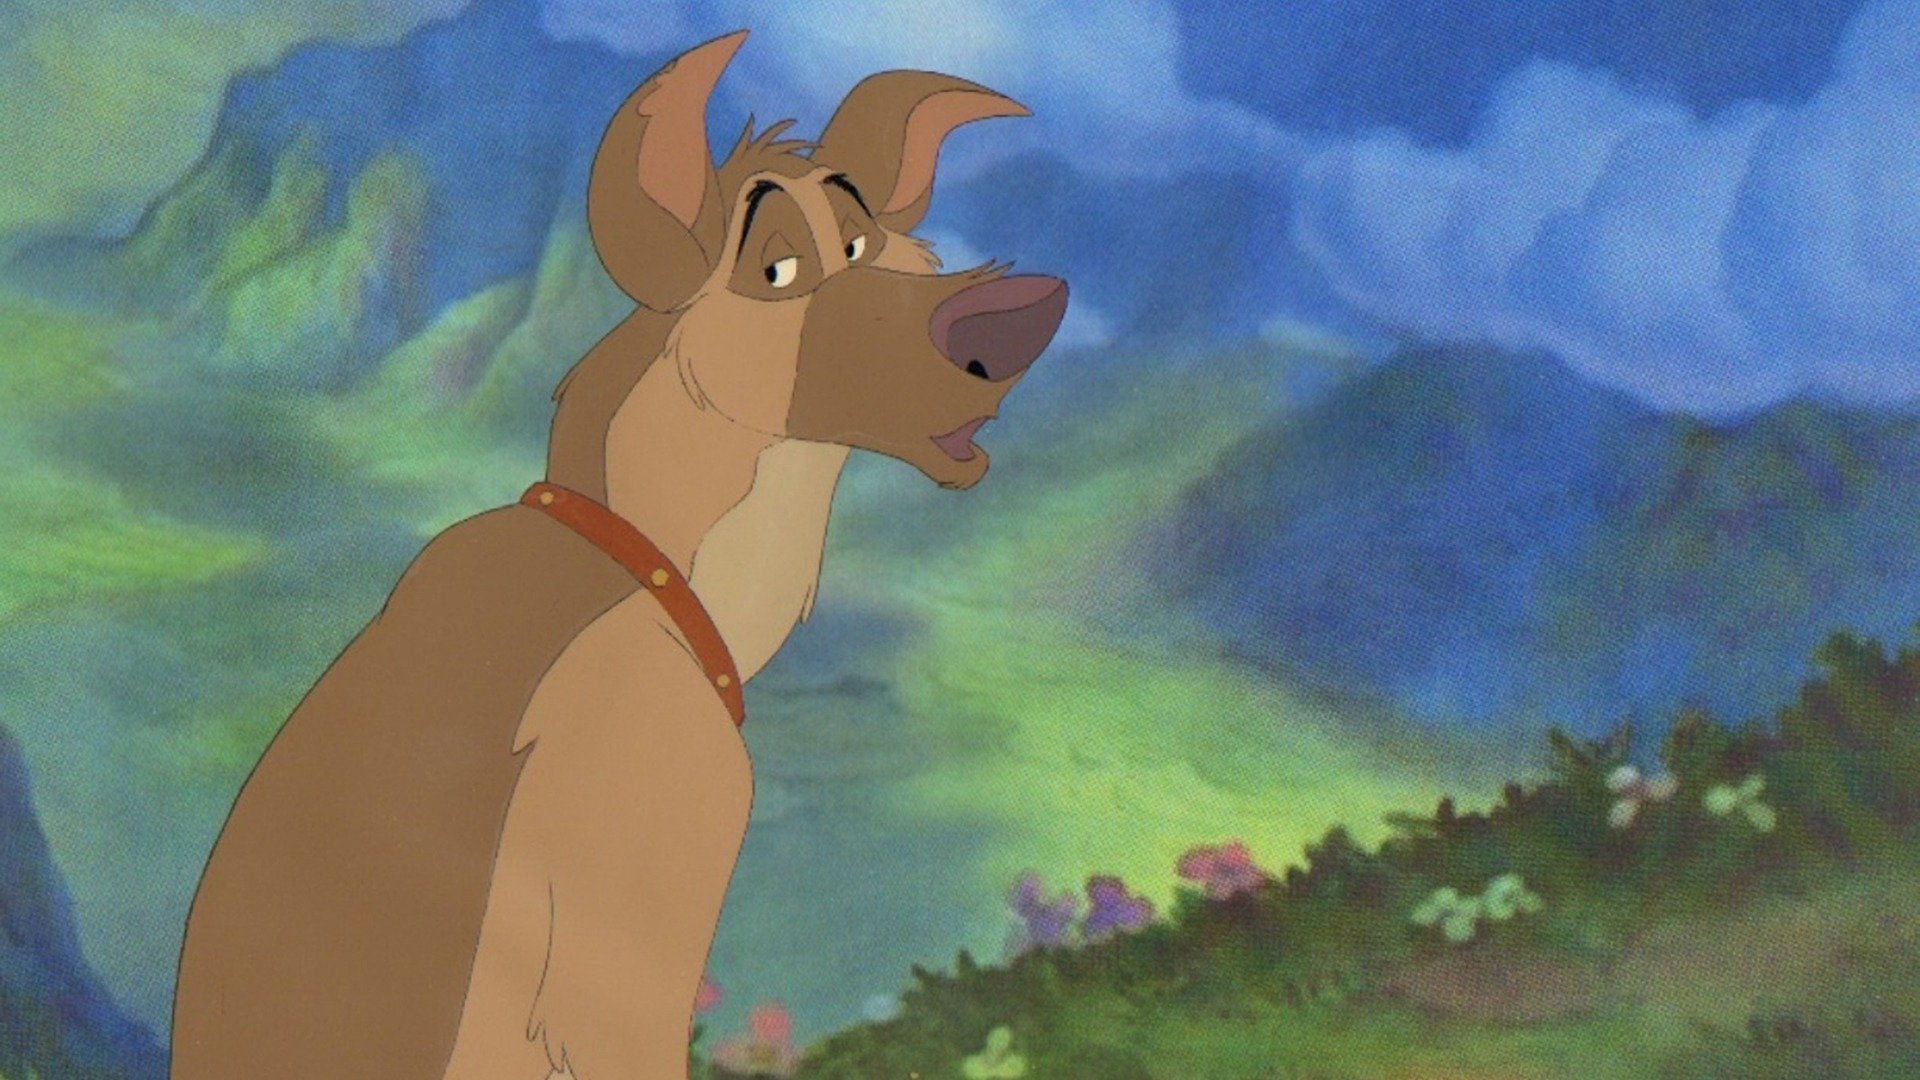 Animation classic, Canine adventure, Heavenly journey, Beloved characters, 1920x1080 Full HD Desktop